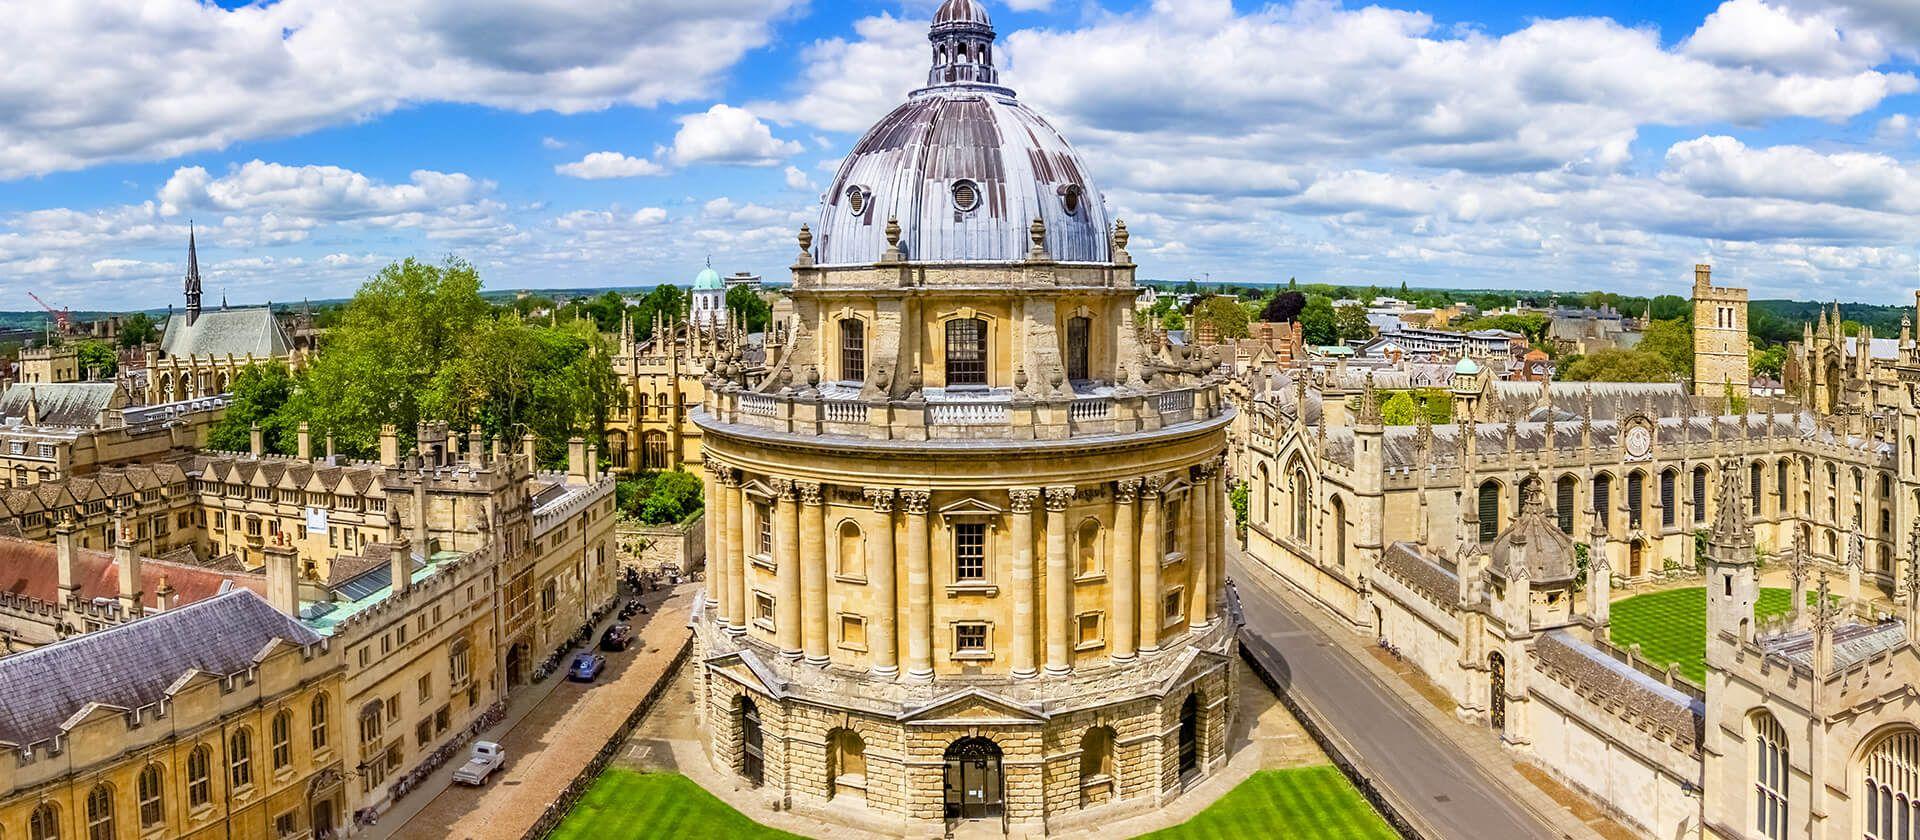 A breathtaking aerial view of Oxford cityscape from the top of the dome, showcasing its architectural beauty and historic charm.